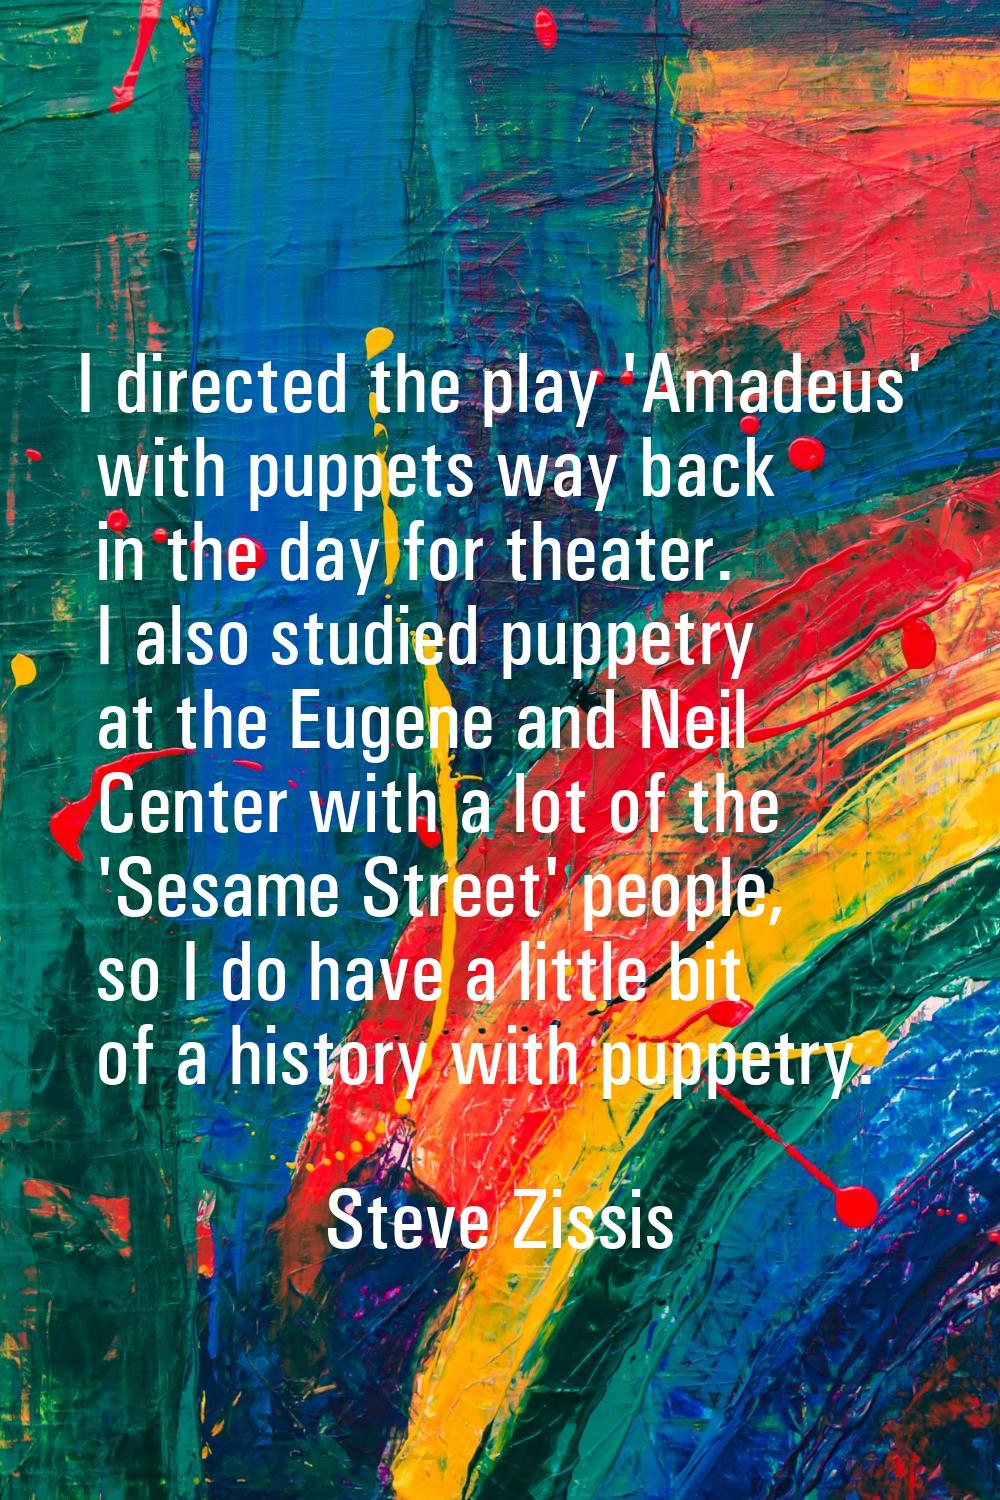 I directed the play 'Amadeus' with puppets way back in the day for theater. I also studied puppetry